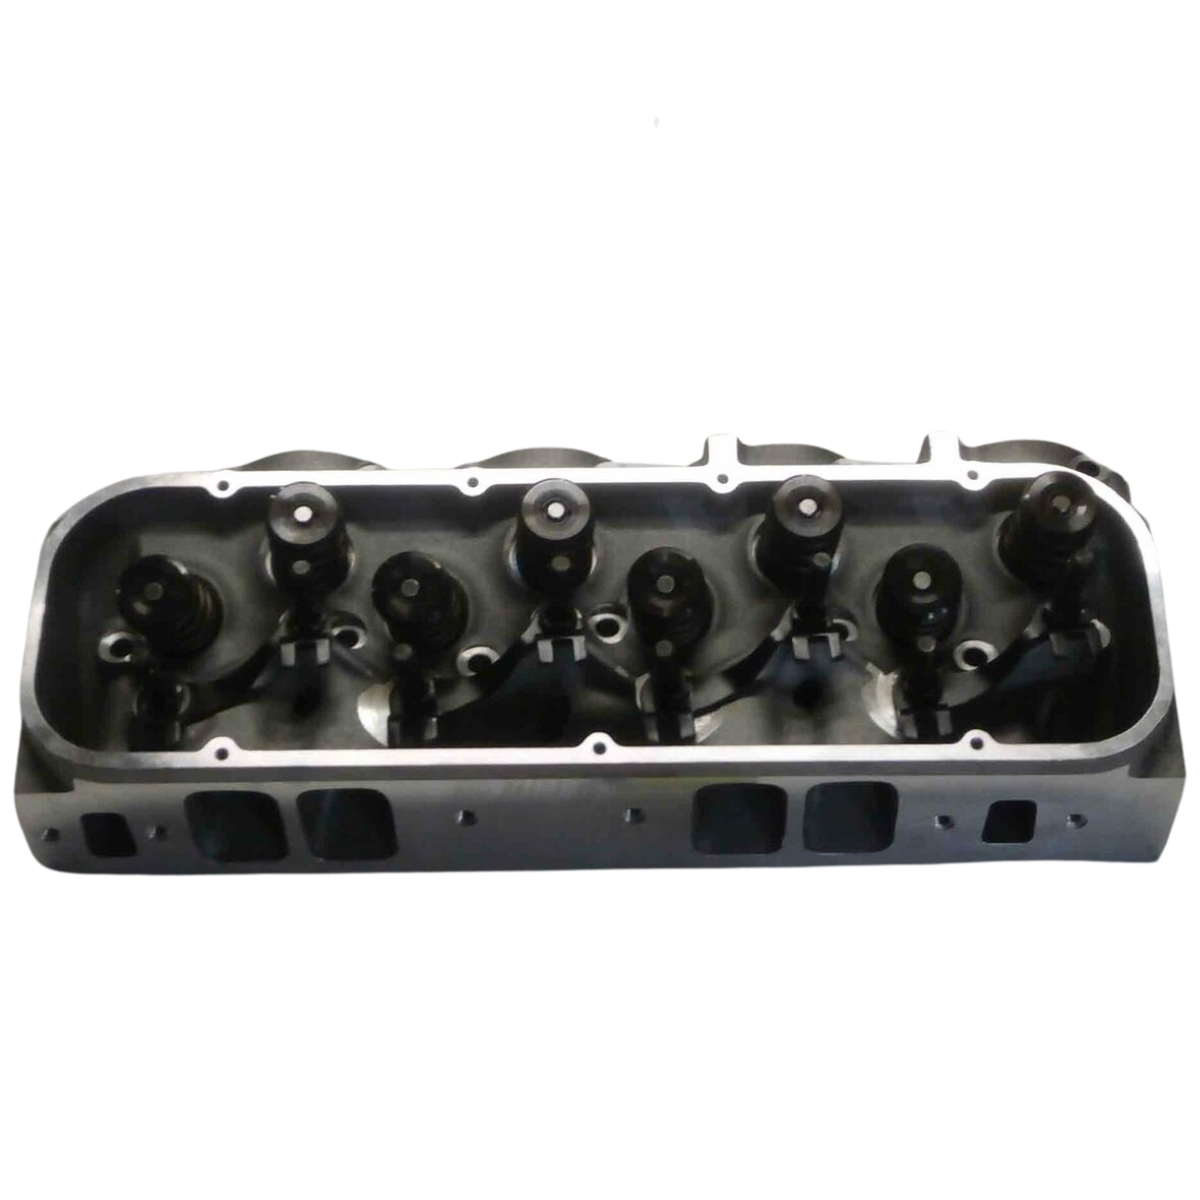 Racing Power Company R4403-AS Bb chevy alum complete assembled cylinder head